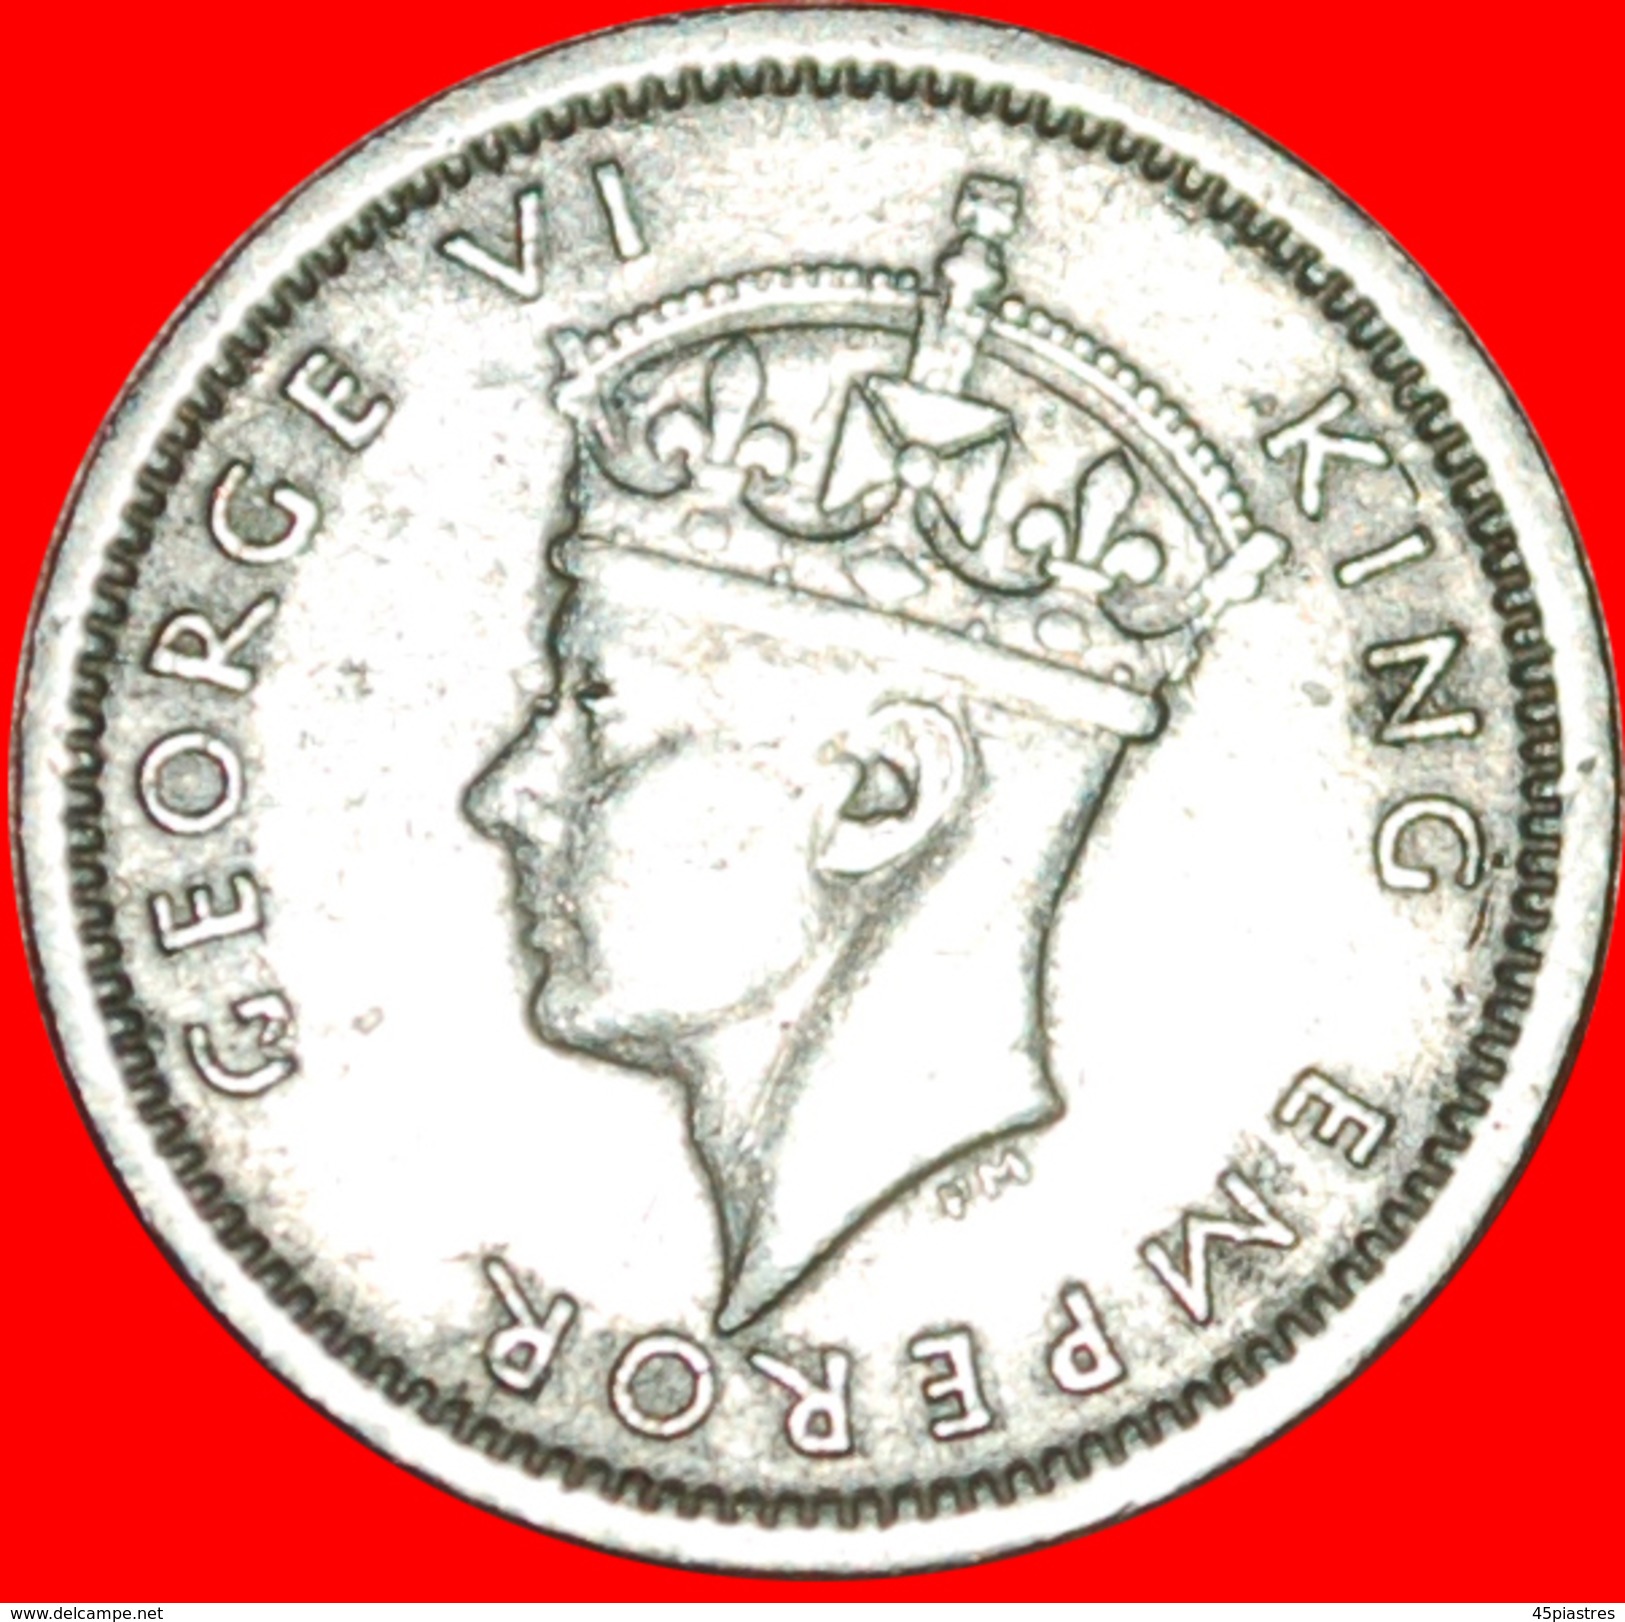 § 3 SPEARS: SOUTHERN RHODESIA &#x2605; 3 PENCE 1947! LOW START&#x2605; NO RESERVE! - Rhodesia